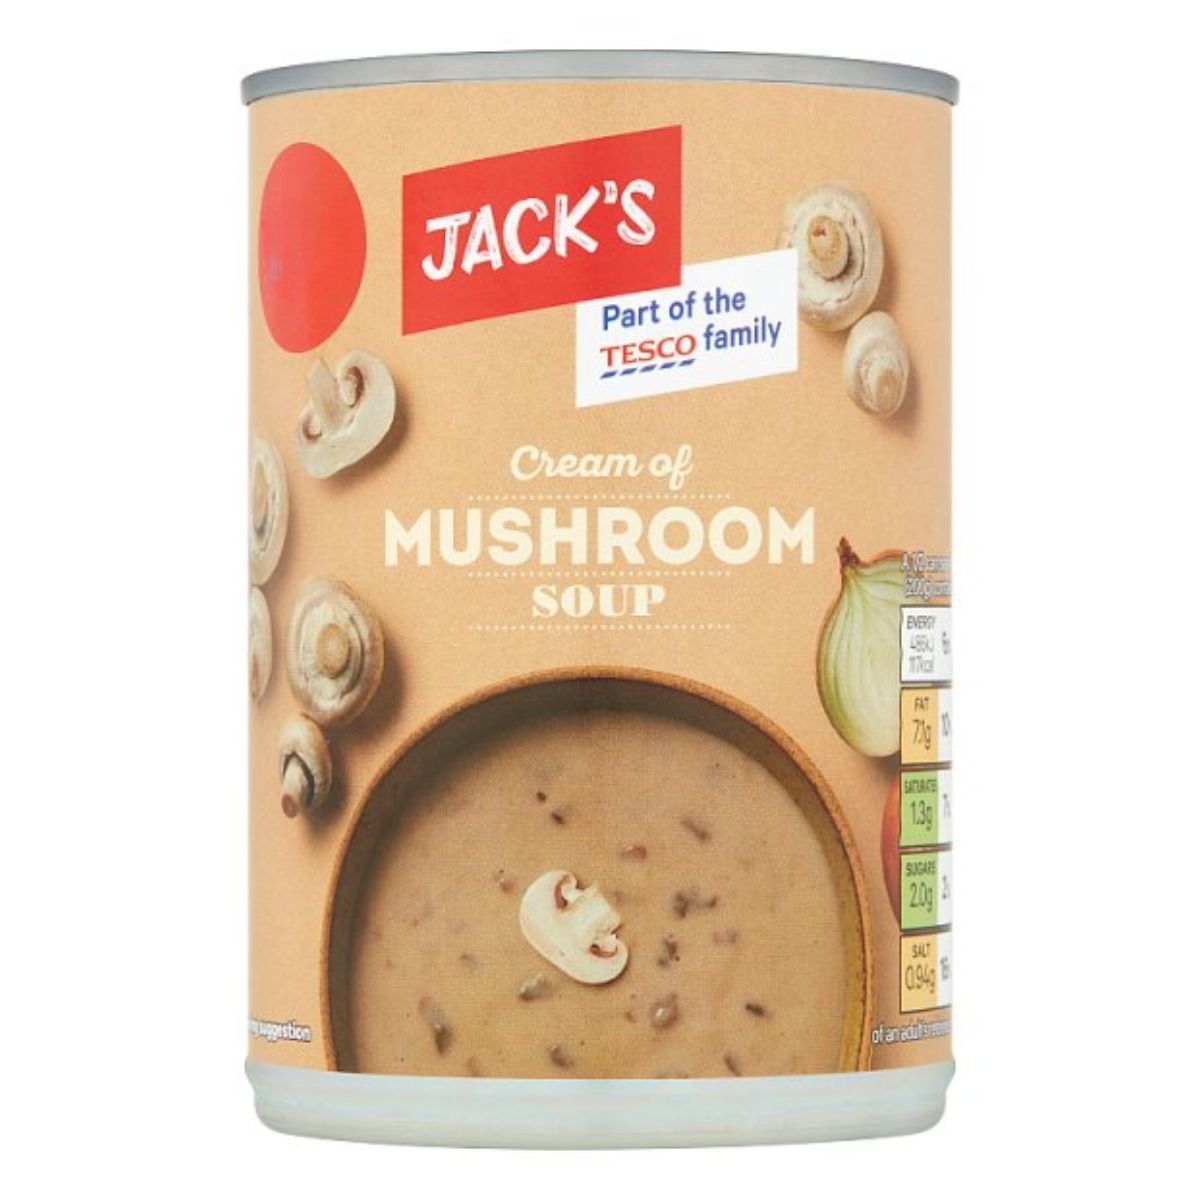 Jacks - Cream of Mushroom Soup - 400g in a can.